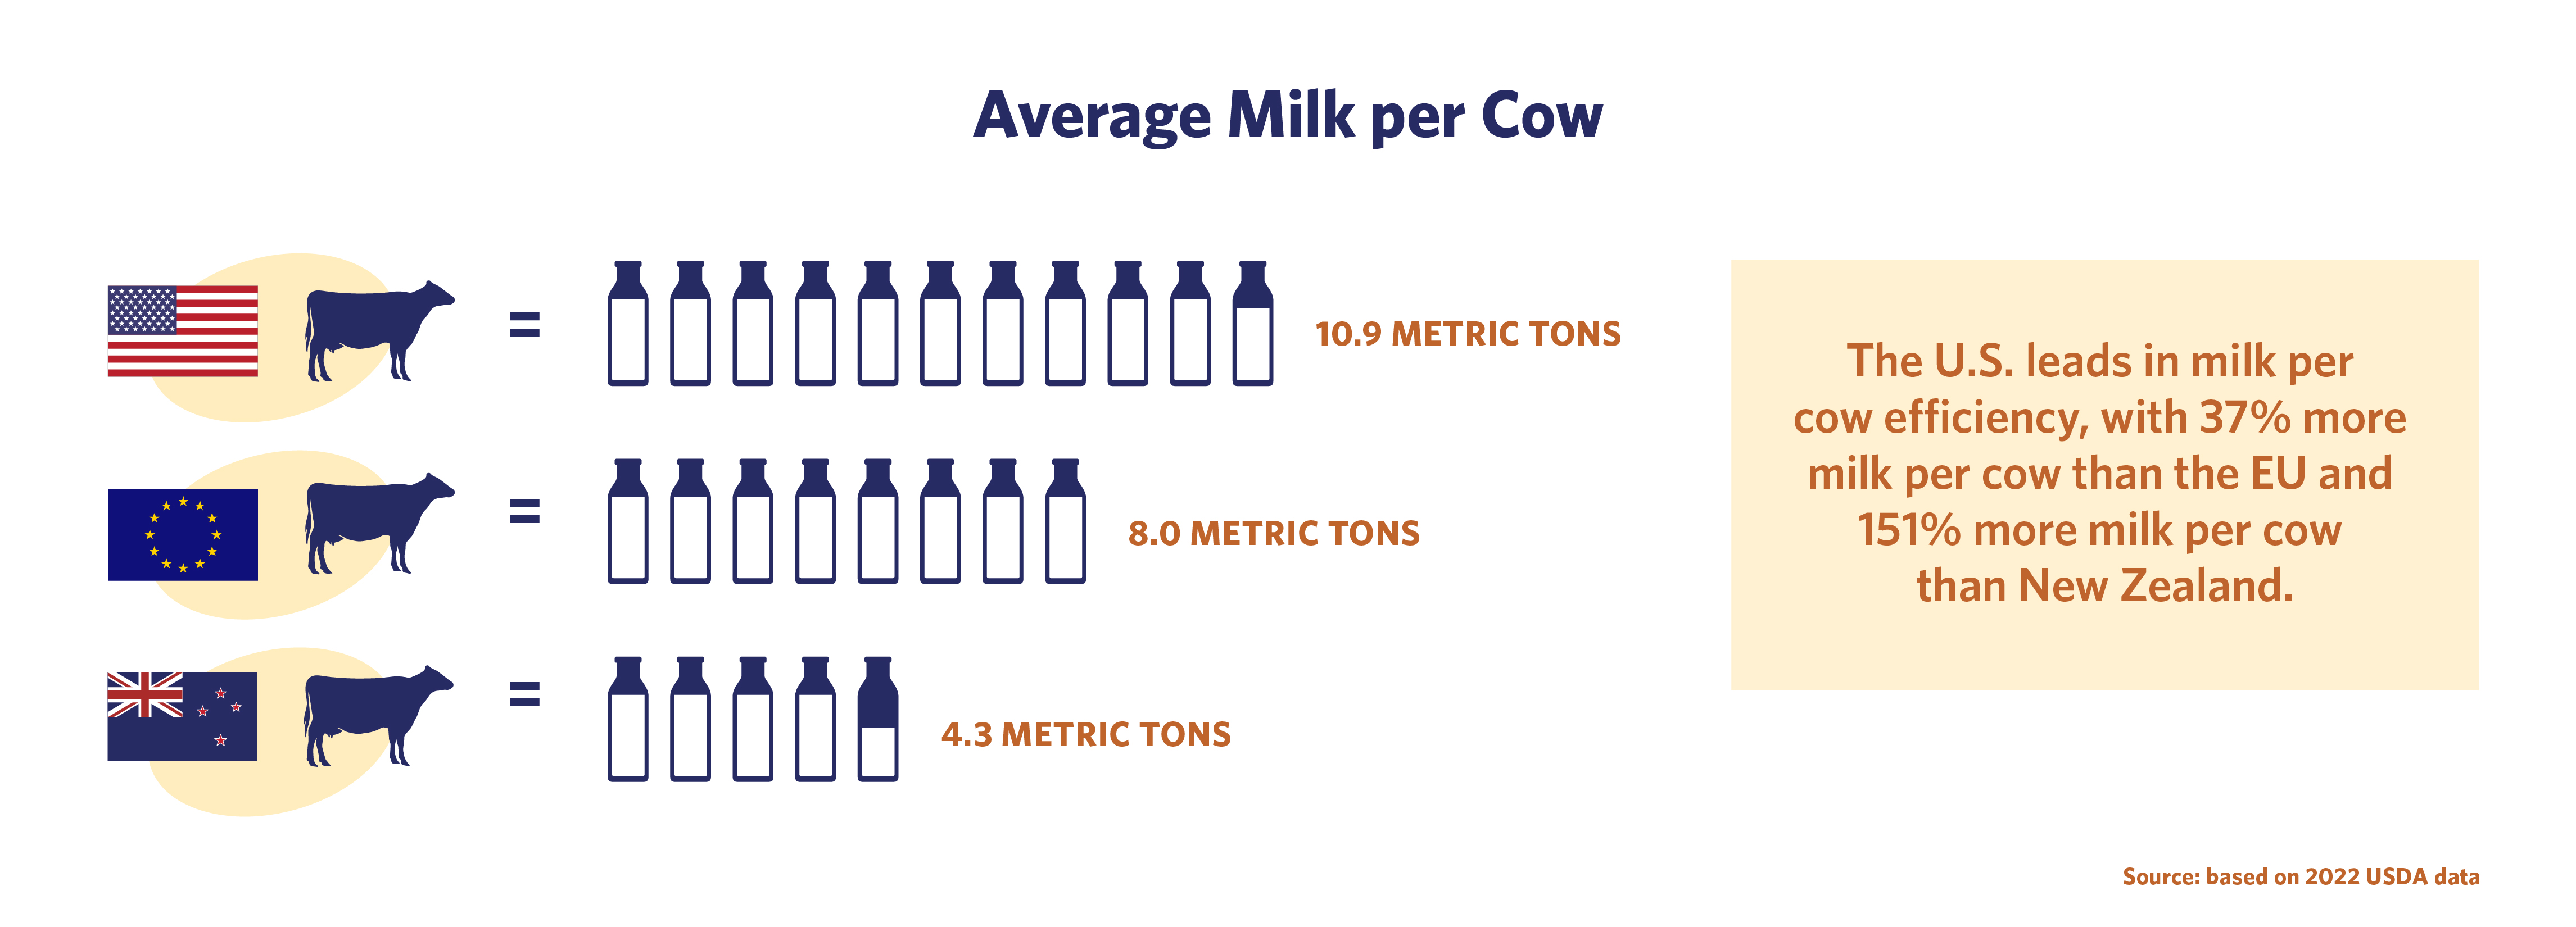 Milk per Cow production infographic by country (USA, EU, and New Zealand)